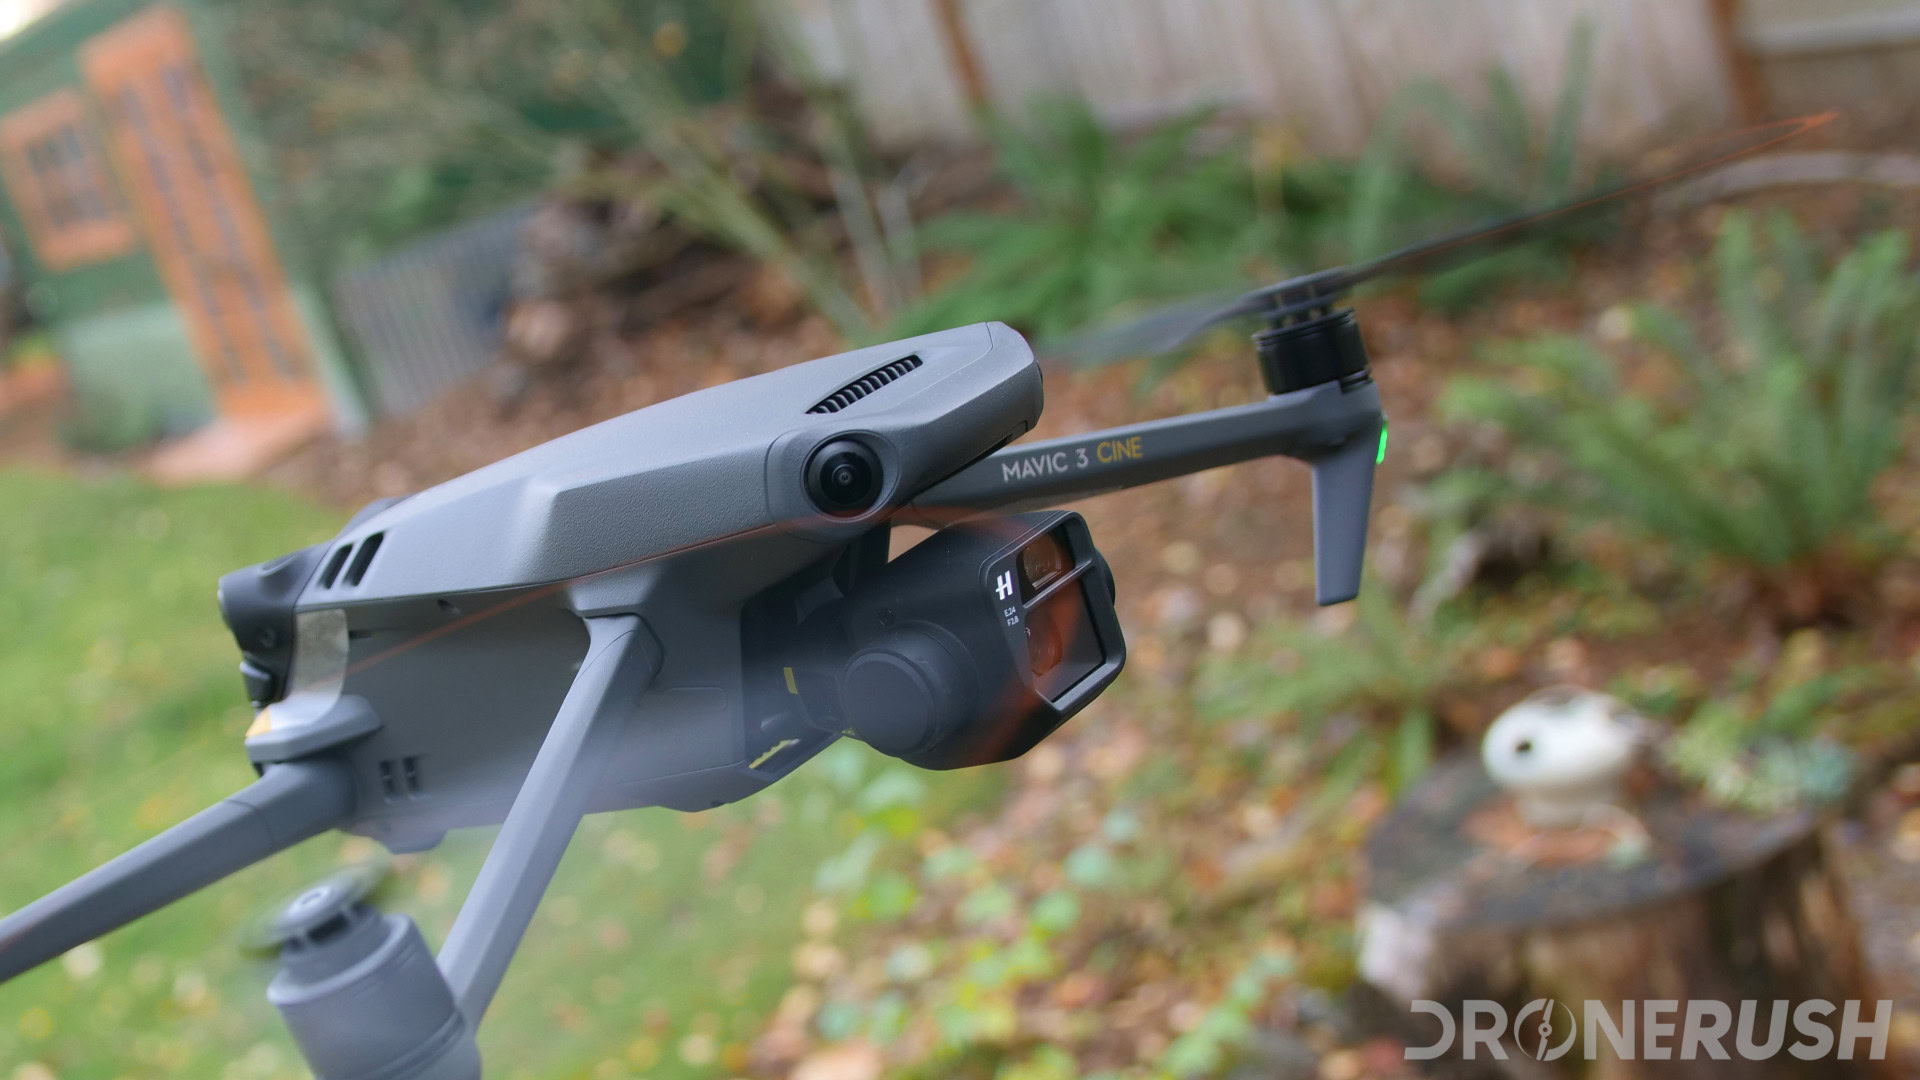 The best drones you can buy in 2022 - Android Authority